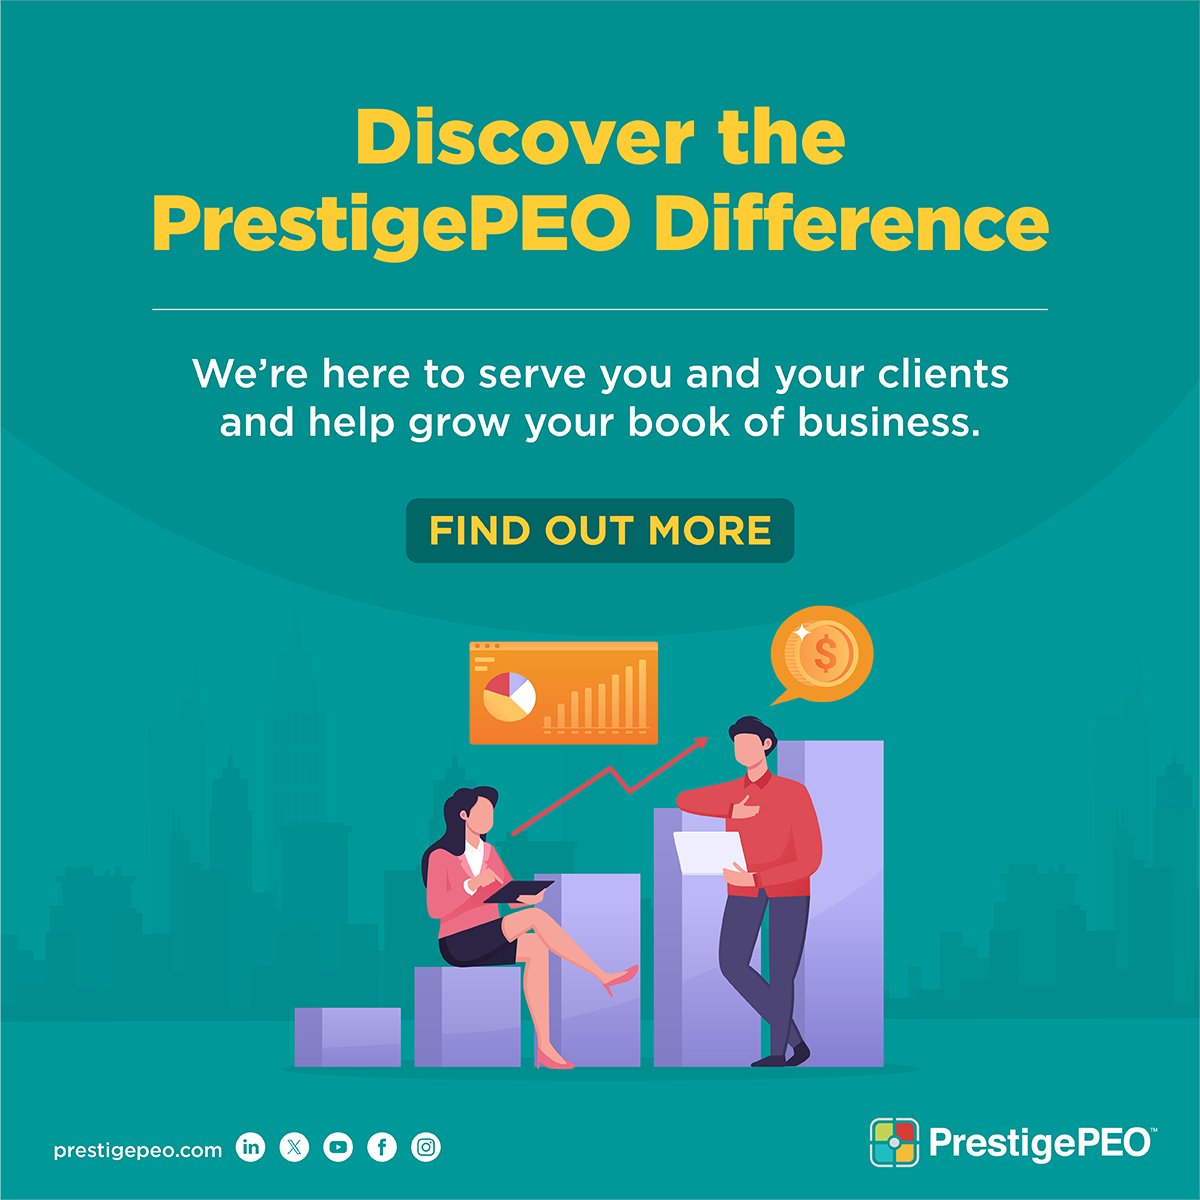 #BenefitsAdvisors, explore the perks of partnering with PrestigePEO. New PEO clients add enticing #employeebenefits like #lifeinsurance, #retirementplans, and #healthbenefits. Introduce your #SMB clients to PrestigePEO today! bit.ly/3PGYFh9